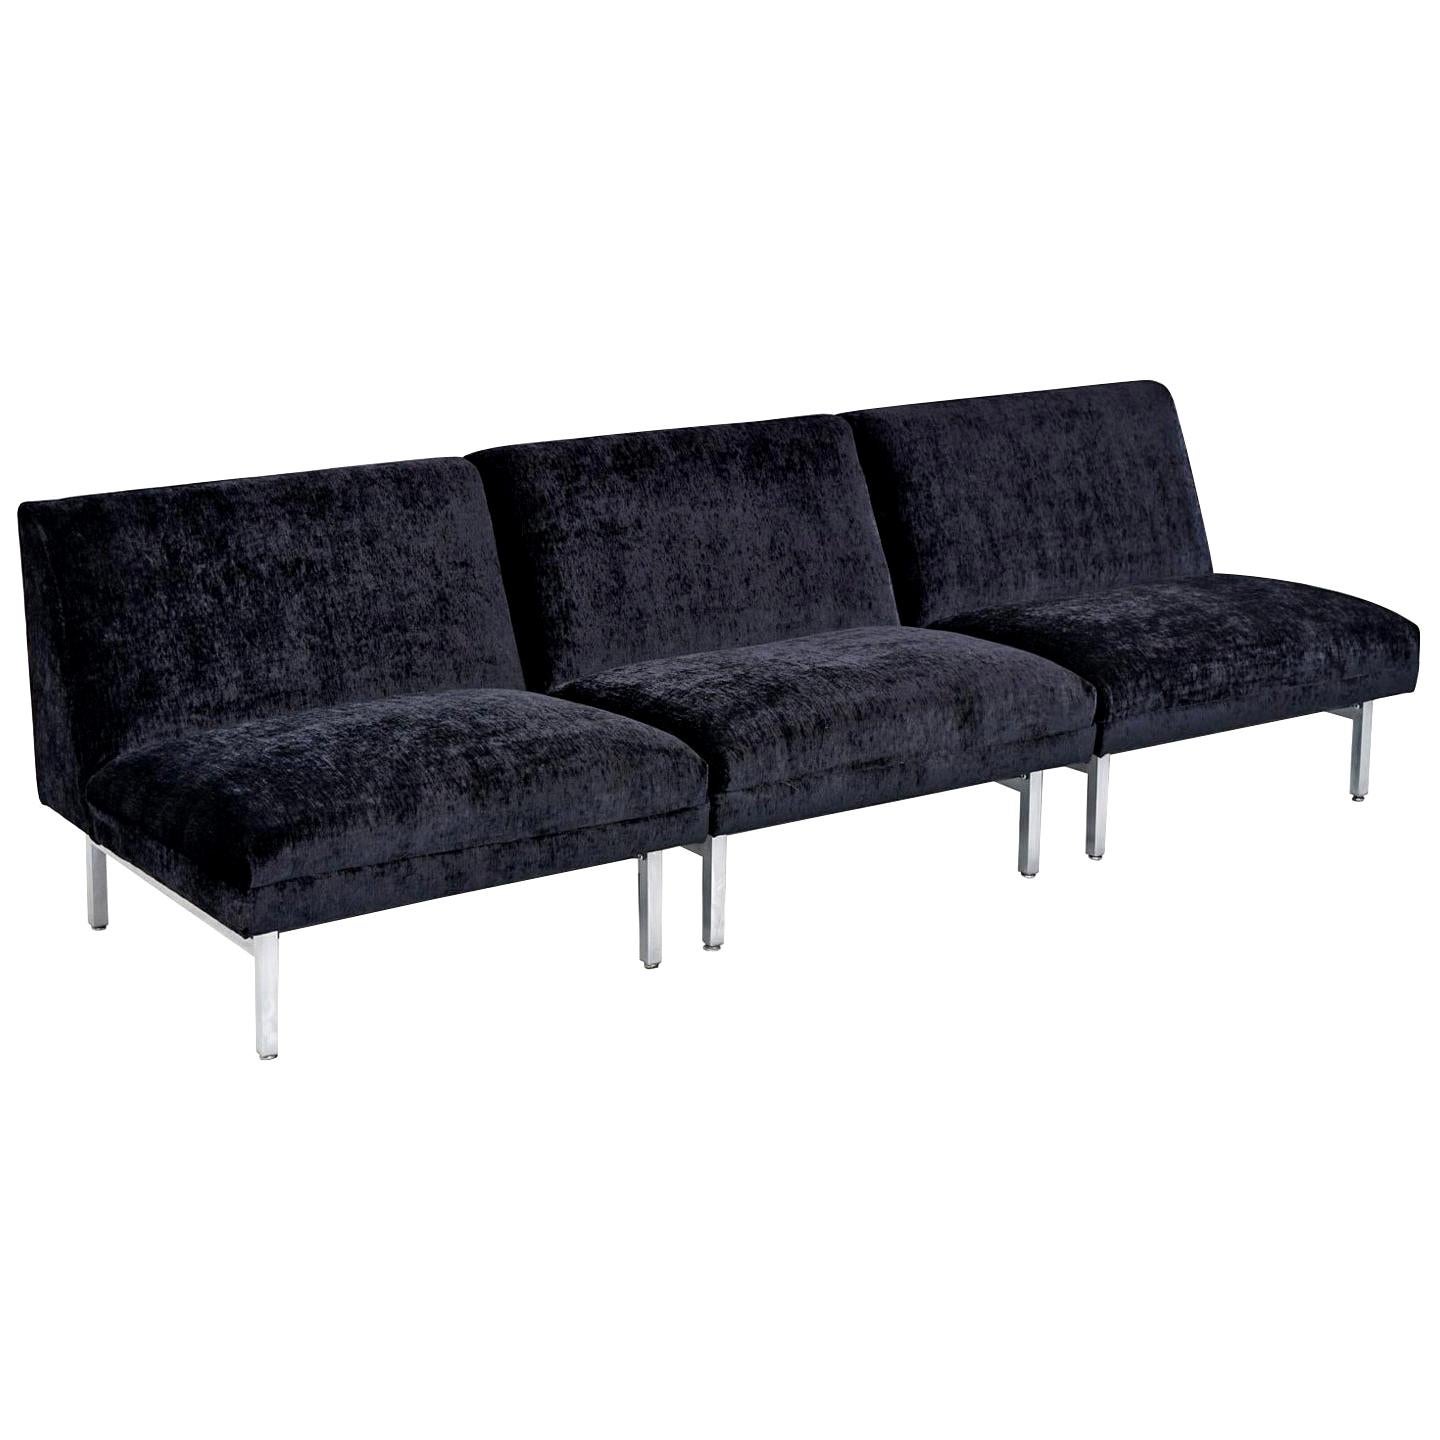 George Nelson for Herman Miller 3-Piece Modular Sectional Sofa Couch